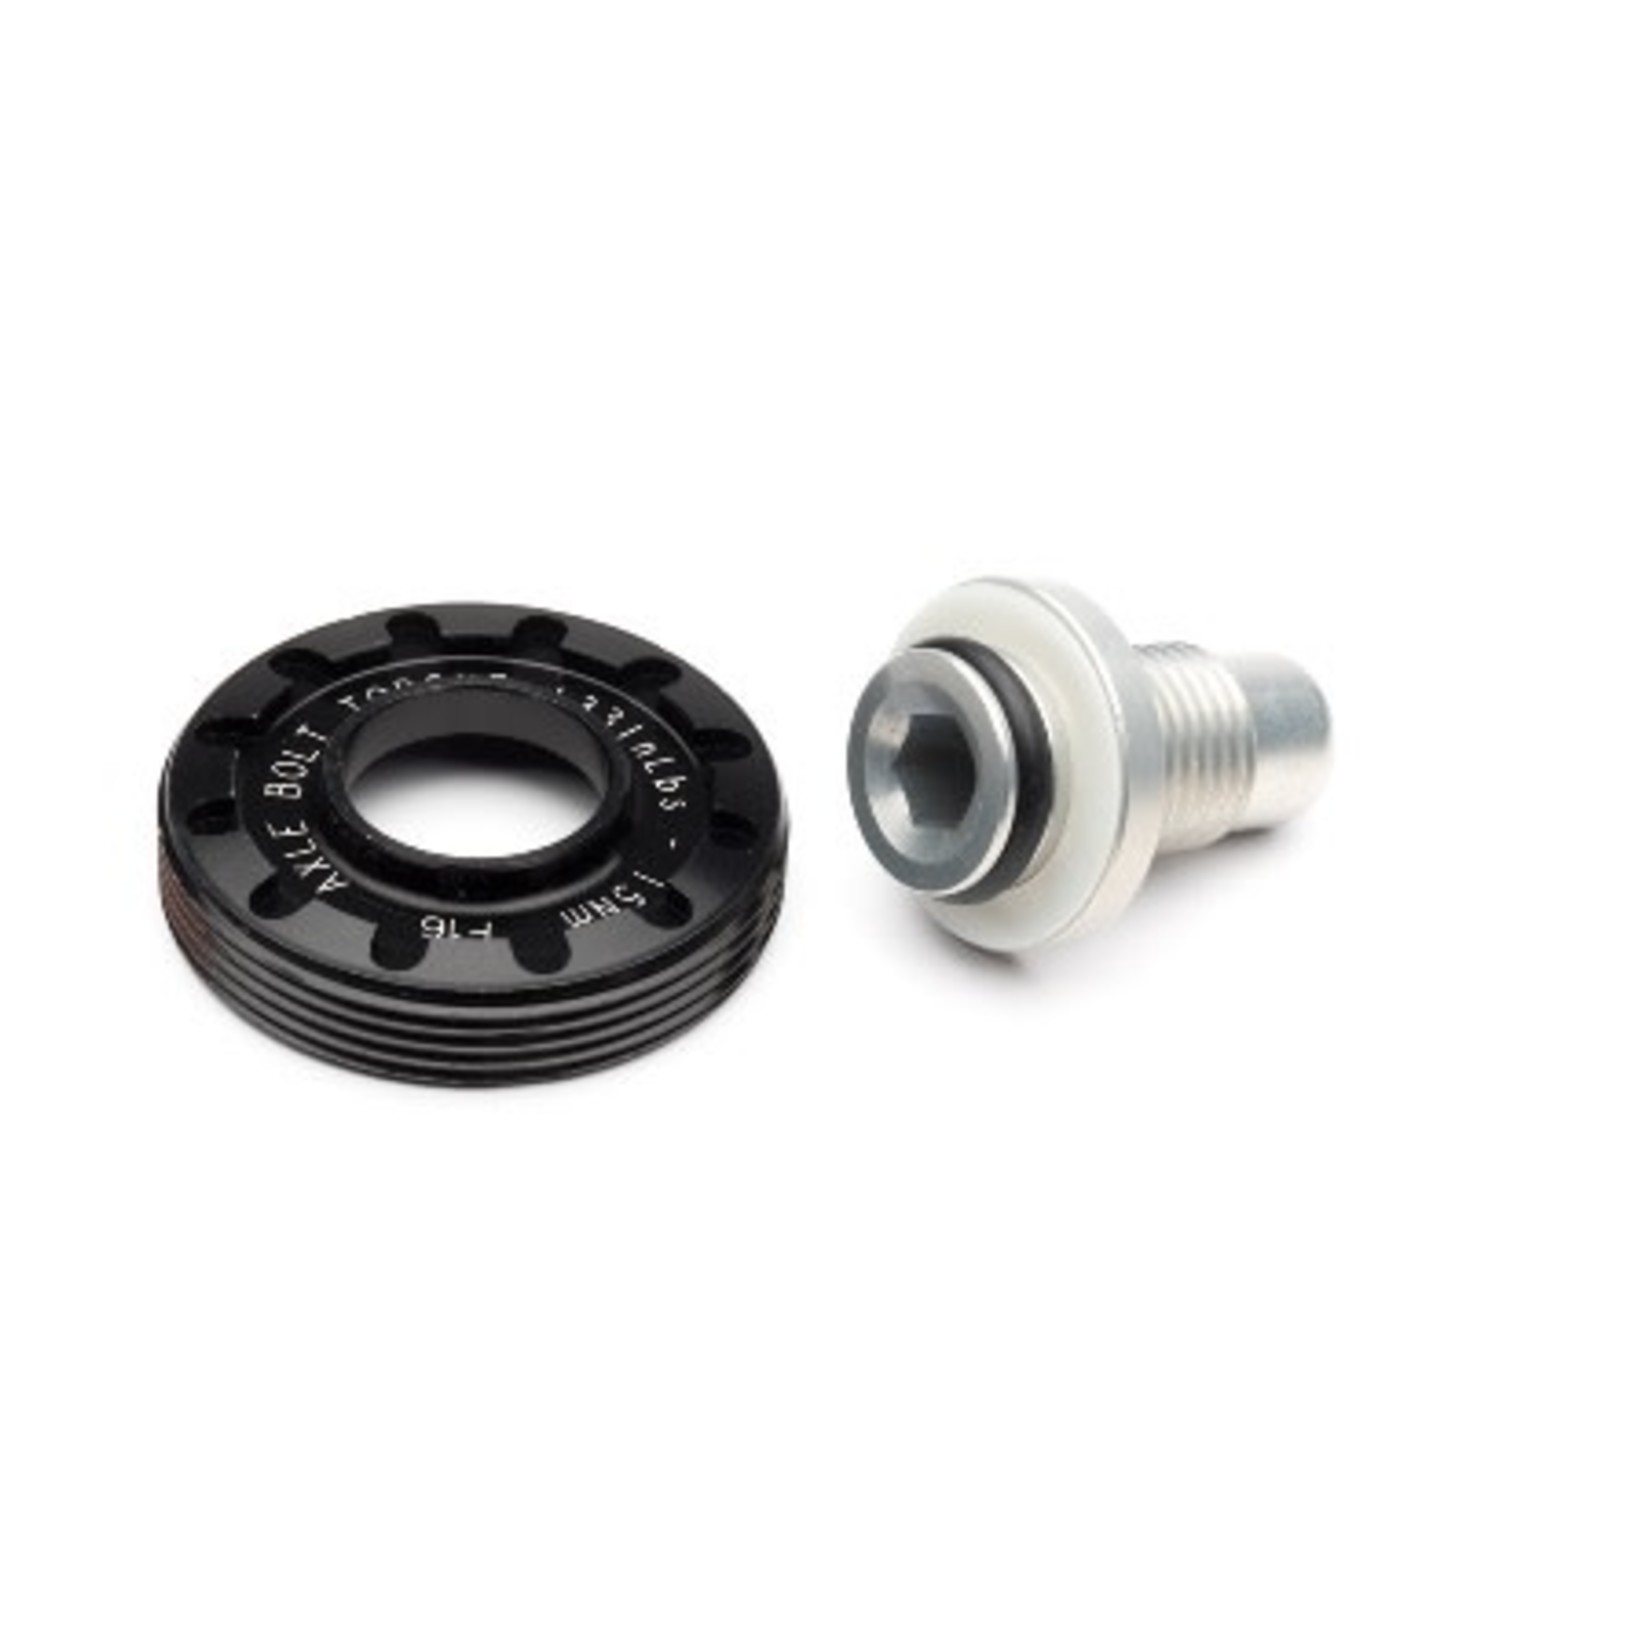 CANNONDALE Cannondale Axle Cap and Bolt for Lefty 50 Hub